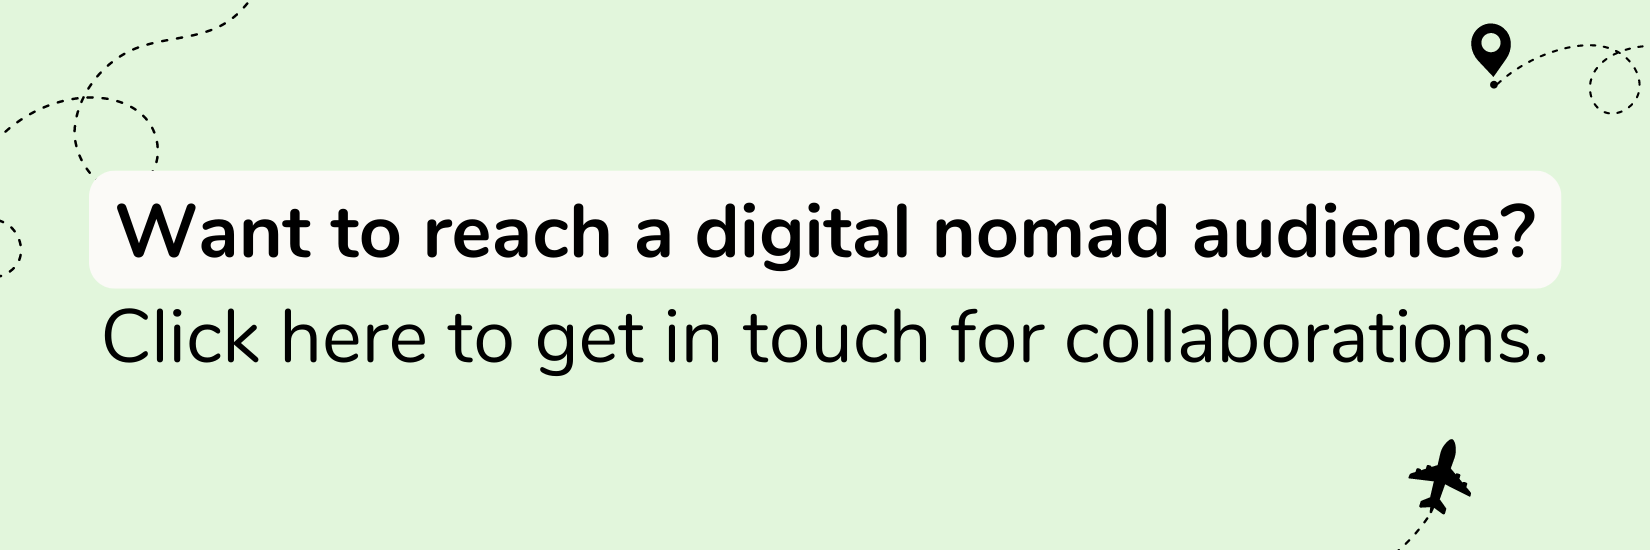 banner_ want to reach a digital nomad audience with digital nomads daily